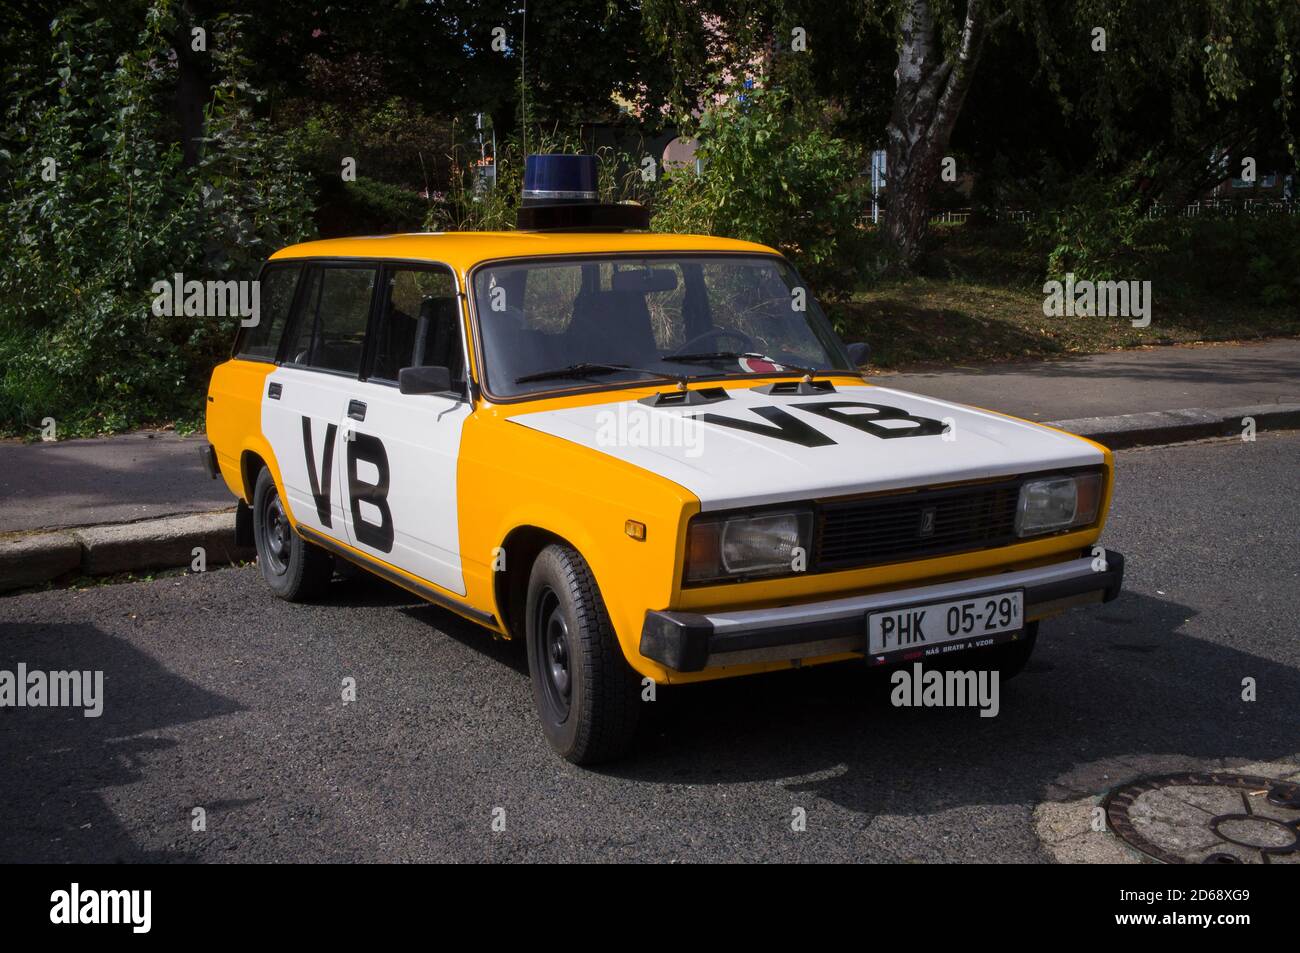 The Lada VAZ 2107 combi veteran car, VB, Public Security, a branch of the  National Security Corps, parked in front of the Restaurant and hotel  Beranek Stock Photo - Alamy